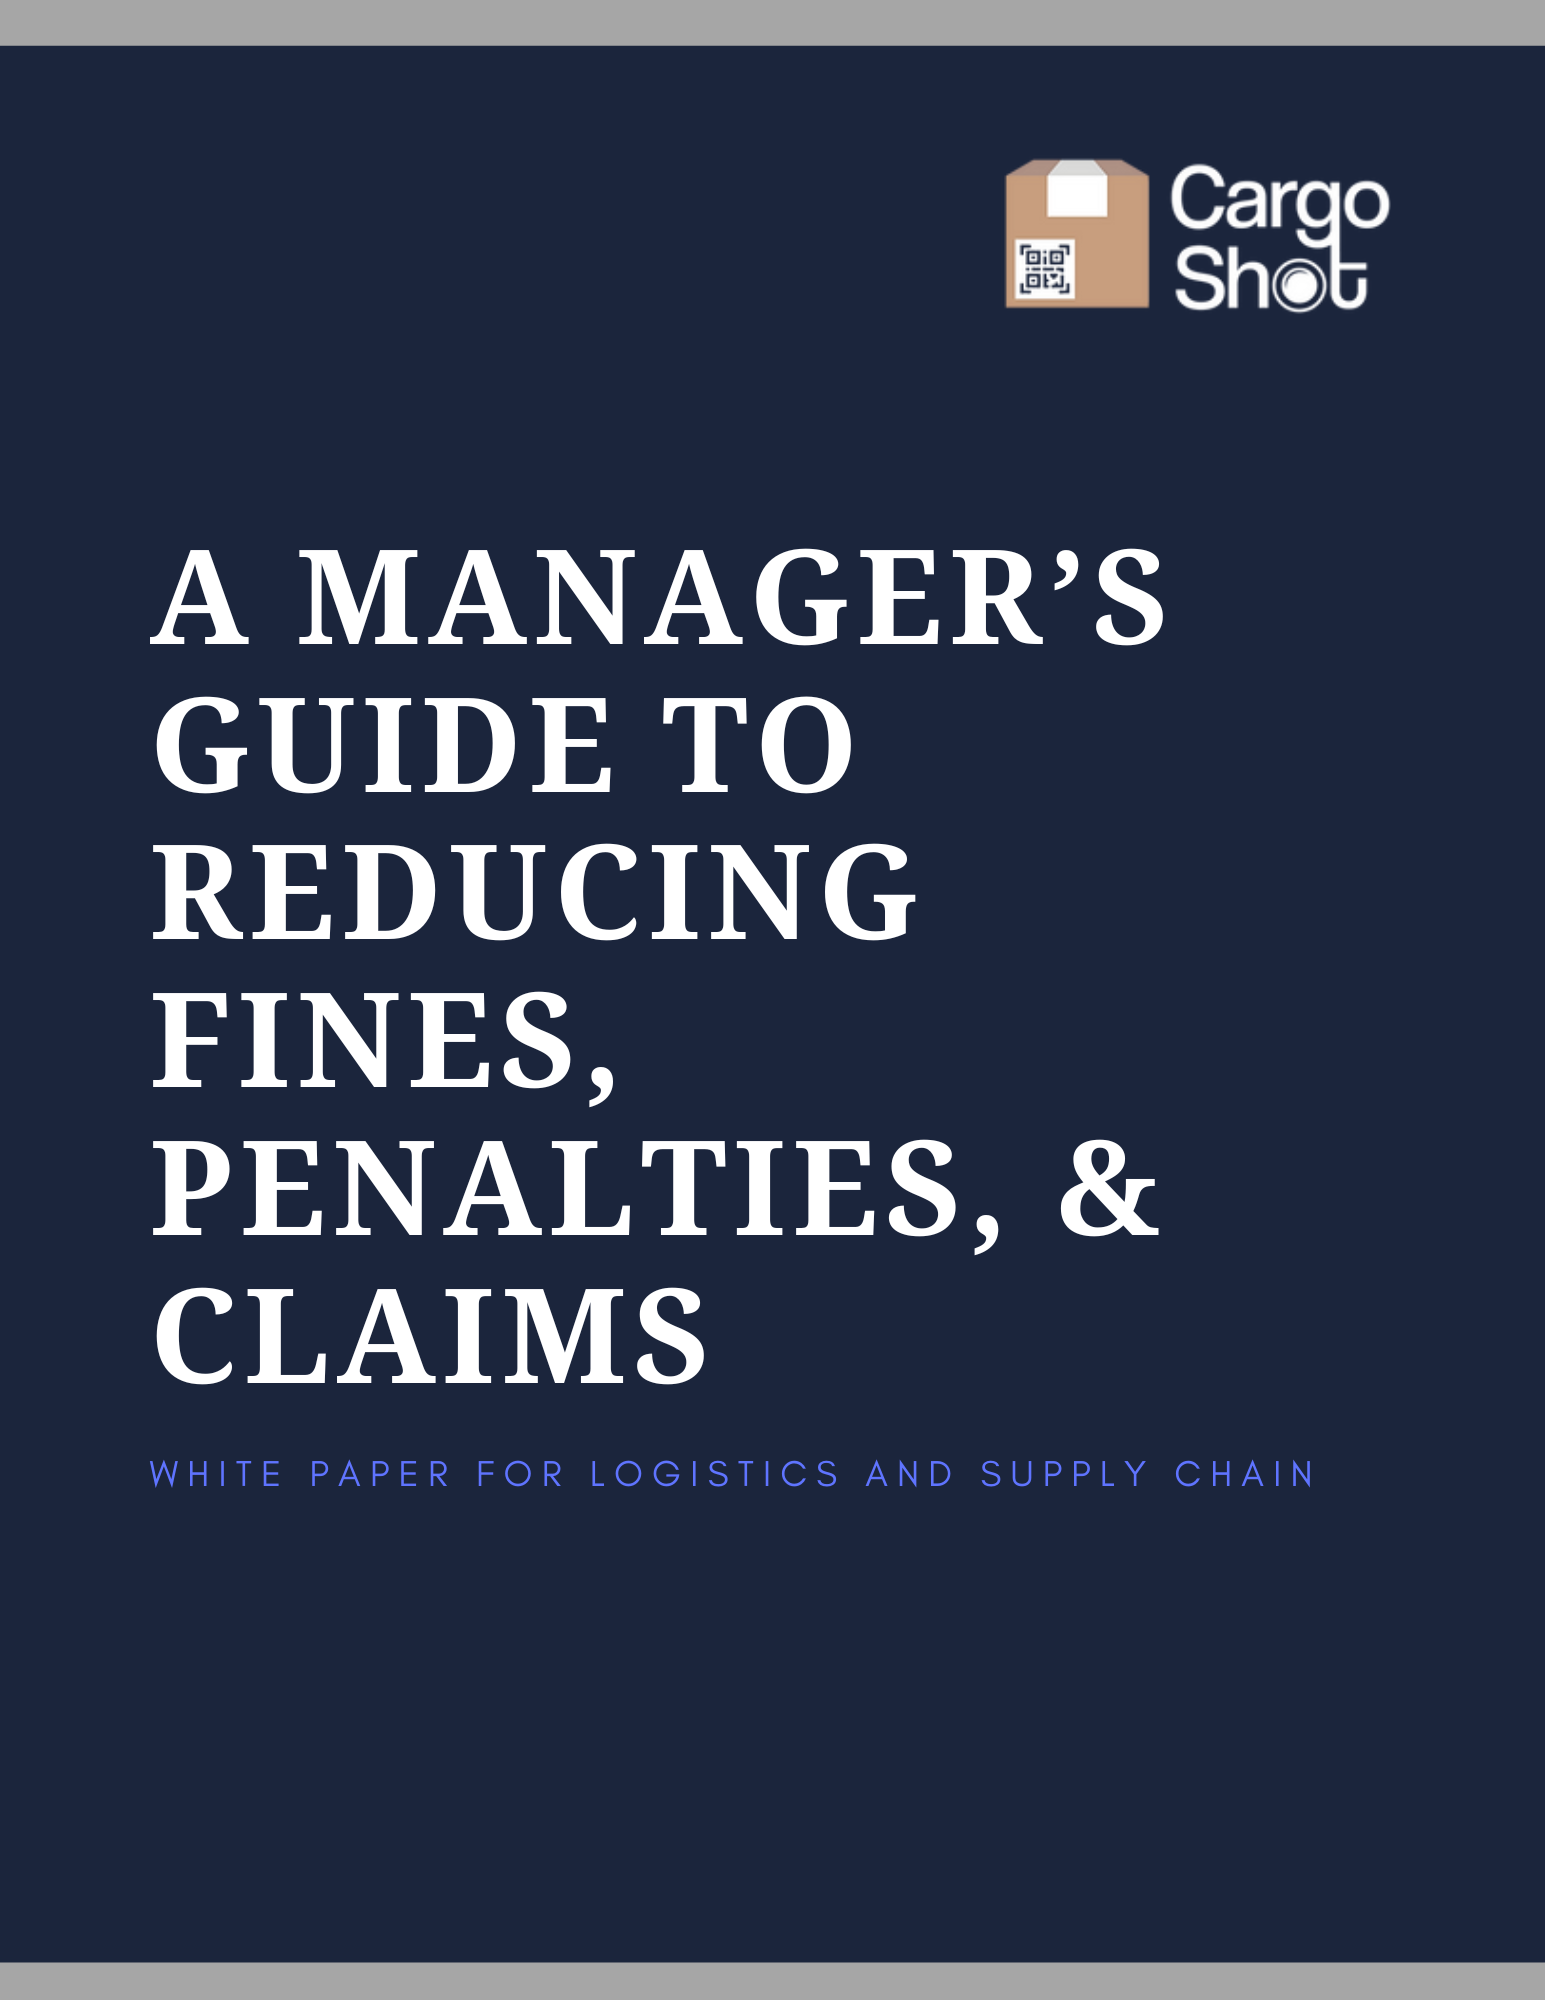 A Manager’s Guide to Reducing Fines, Penalties, & Claims